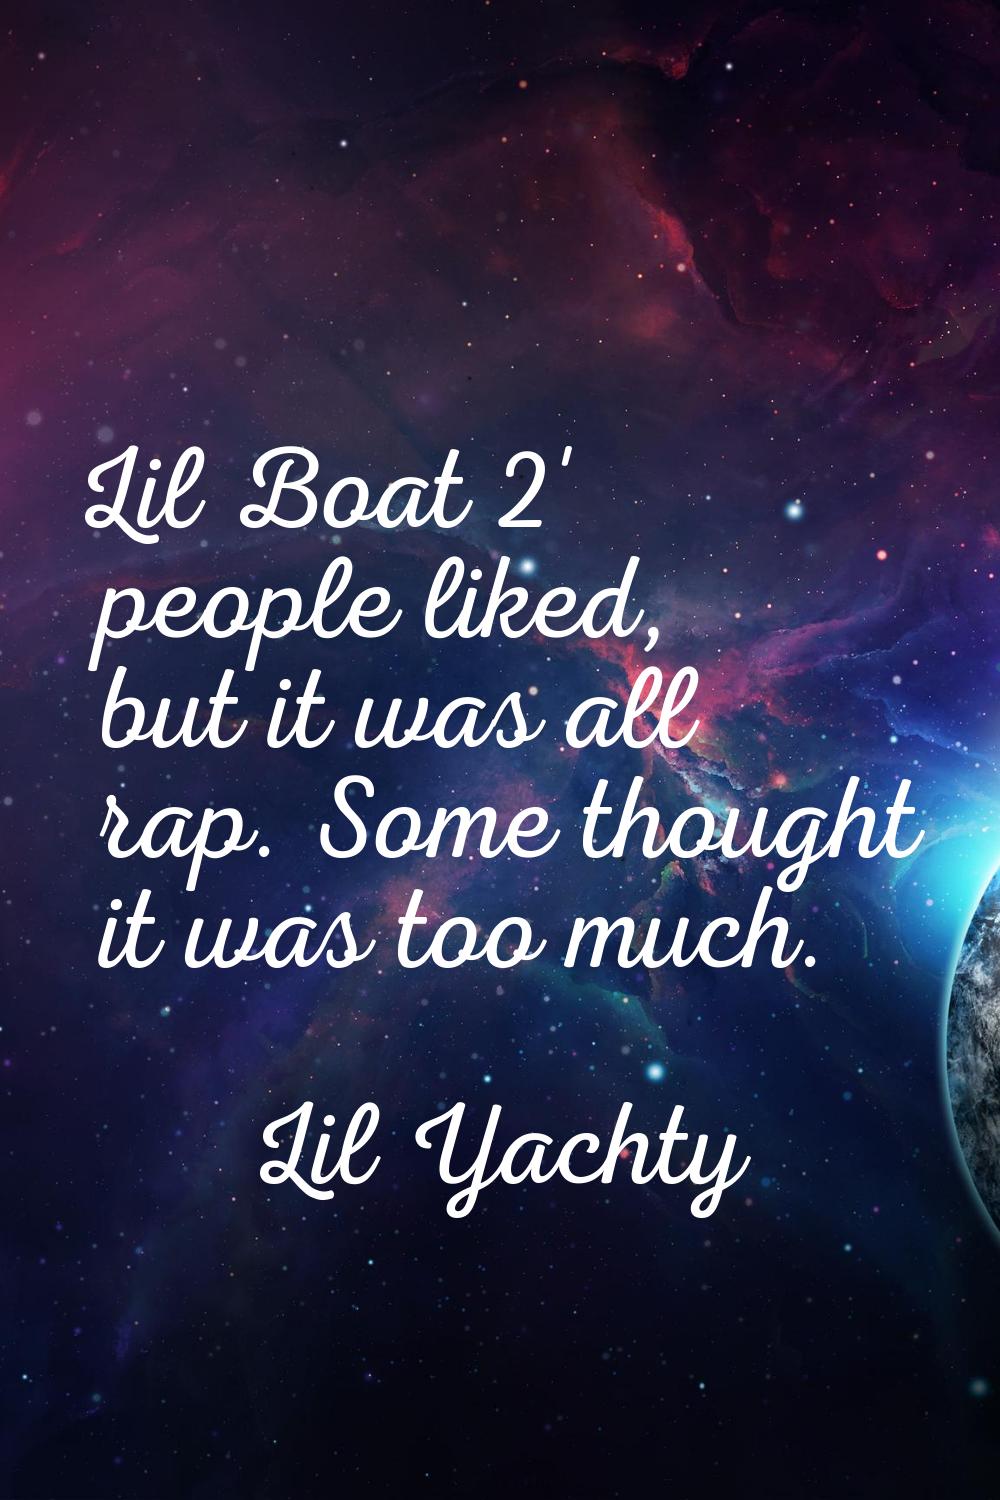 Lil Boat 2' people liked, but it was all rap. Some thought it was too much.